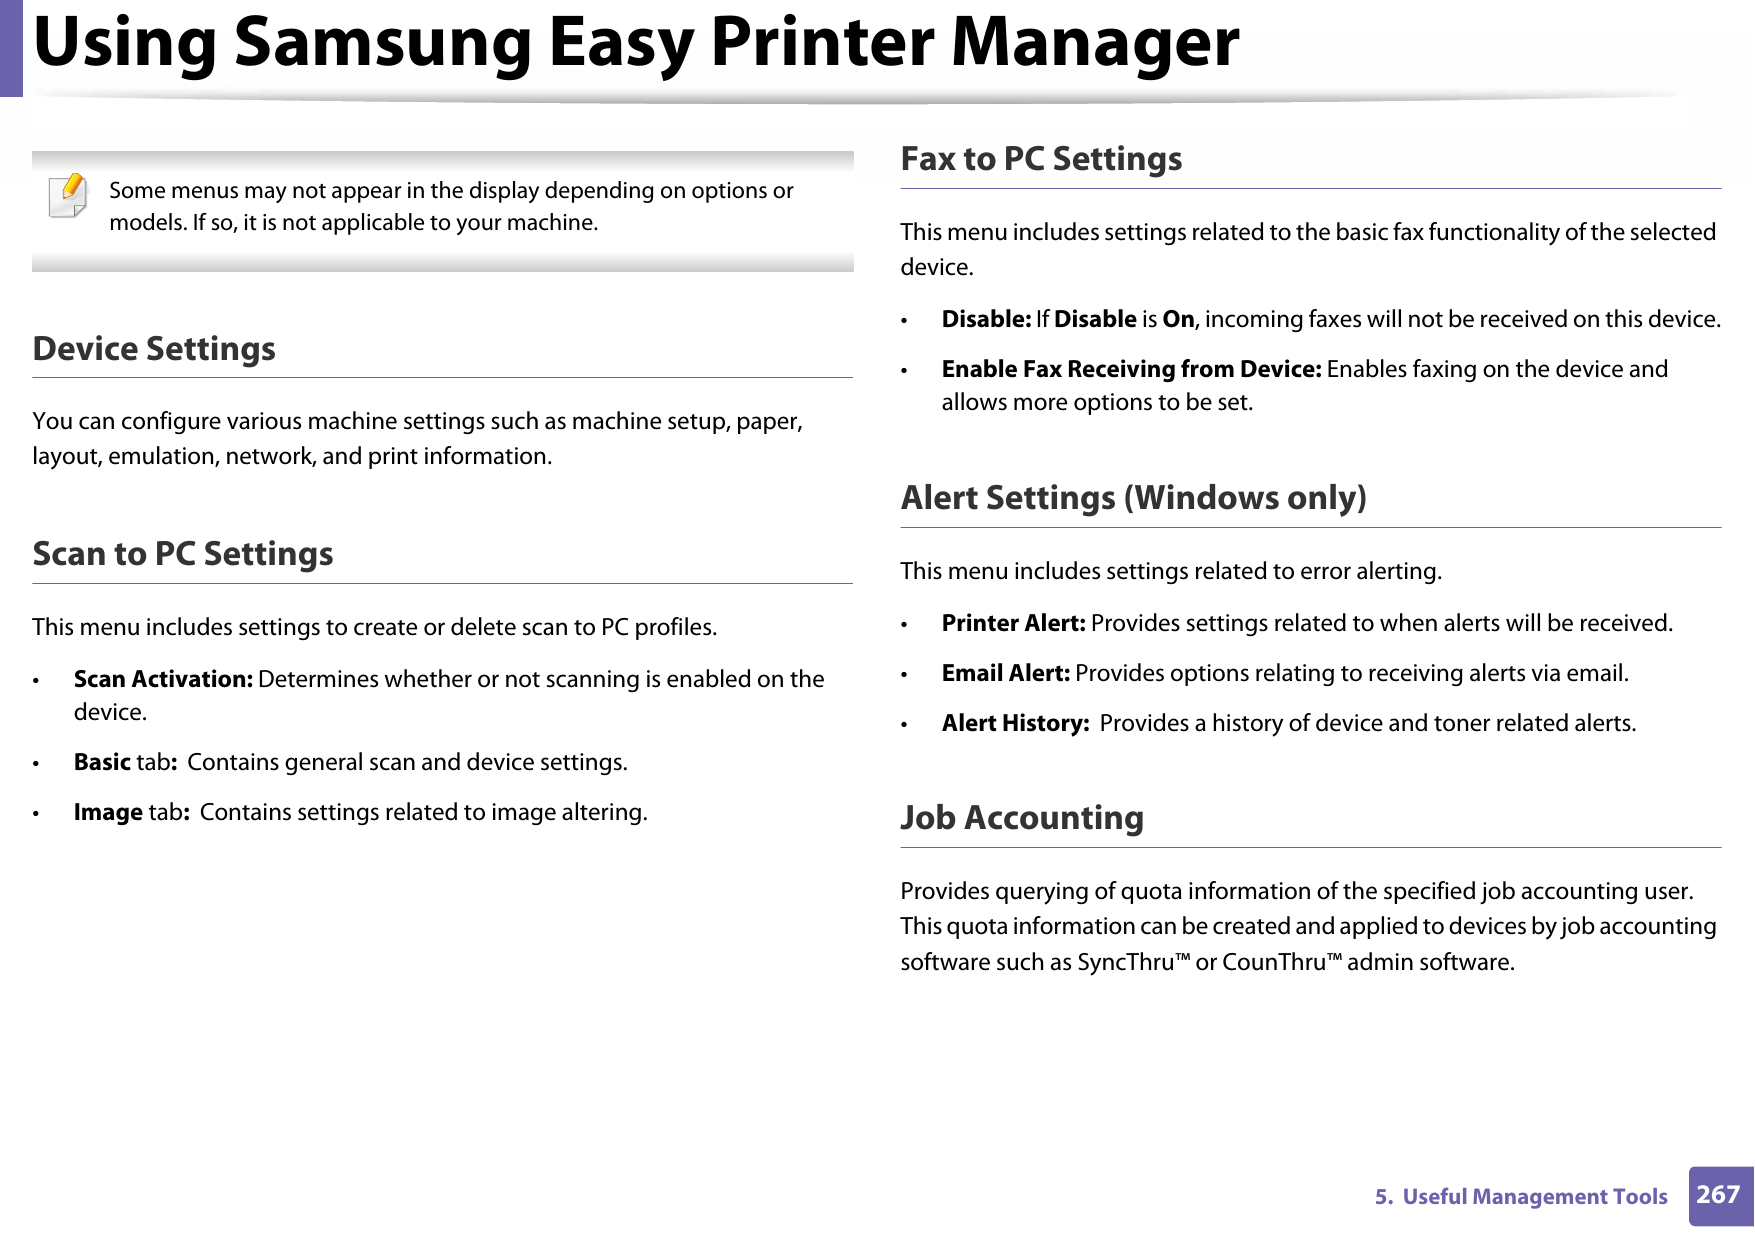 Using Samsung Easy Printer Manager2675.  Useful Management Tools Some menus may not appear in the display depending on options or models. If so, it is not applicable to your machine. Device SettingsYou can configure various machine settings such as machine setup, paper, layout, emulation, network, and print information.Scan to PC SettingsThis menu includes settings to create or delete scan to PC profiles. •Scan Activation: Determines whether or not scanning is enabled on the device.•Basic tab:  Contains general scan and device settings.•Image tab:  Contains settings related to image altering.Fax to PC SettingsThis menu includes settings related to the basic fax functionality of the selected device. •Disable: If Disable is On, incoming faxes will not be received on this device.•Enable Fax Receiving from Device: Enables faxing on the device and allows more options to be set.Alert Settings (Windows only)This menu includes settings related to error alerting. •Printer Alert: Provides settings related to when alerts will be received.•Email Alert: Provides options relating to receiving alerts via email.•Alert History:  Provides a history of device and toner related alerts.Job AccountingProvides querying of quota information of the specified job accounting user. This quota information can be created and applied to devices by job accounting software such as SyncThru™ or CounThru™ admin software.